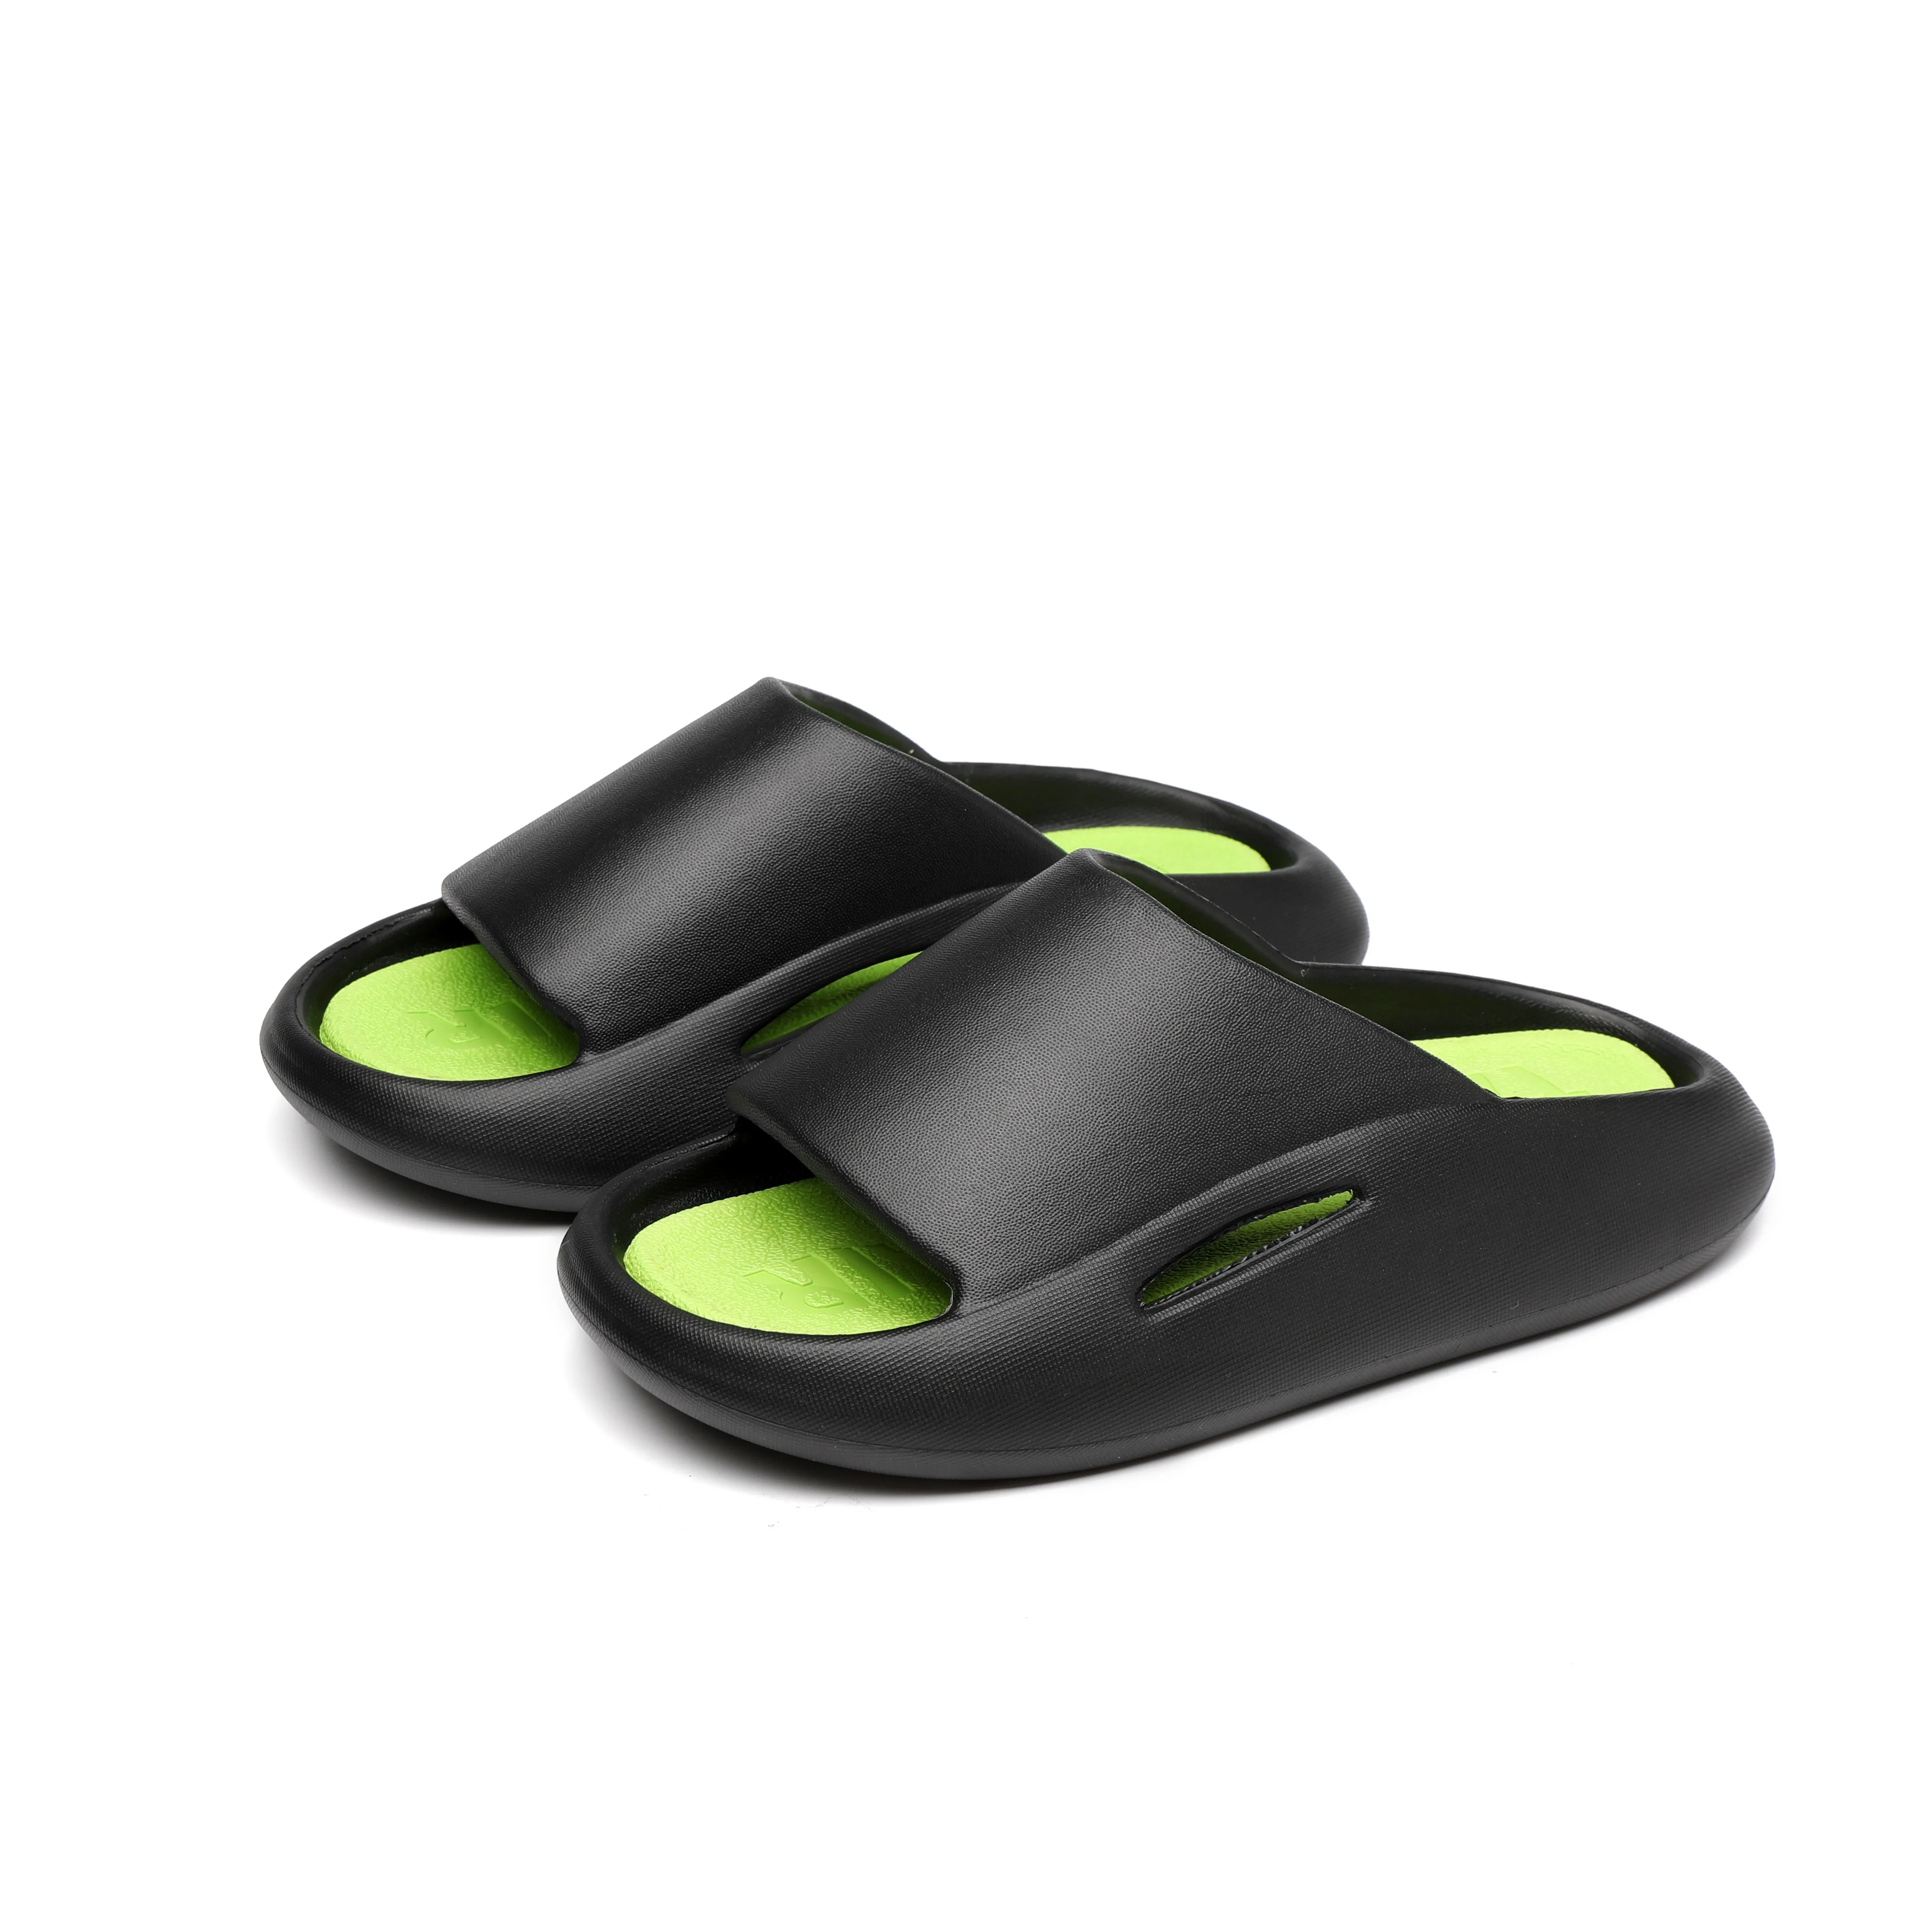 new slippers indoor and outdoor wear non-slip bathroom shower slippers for women and man